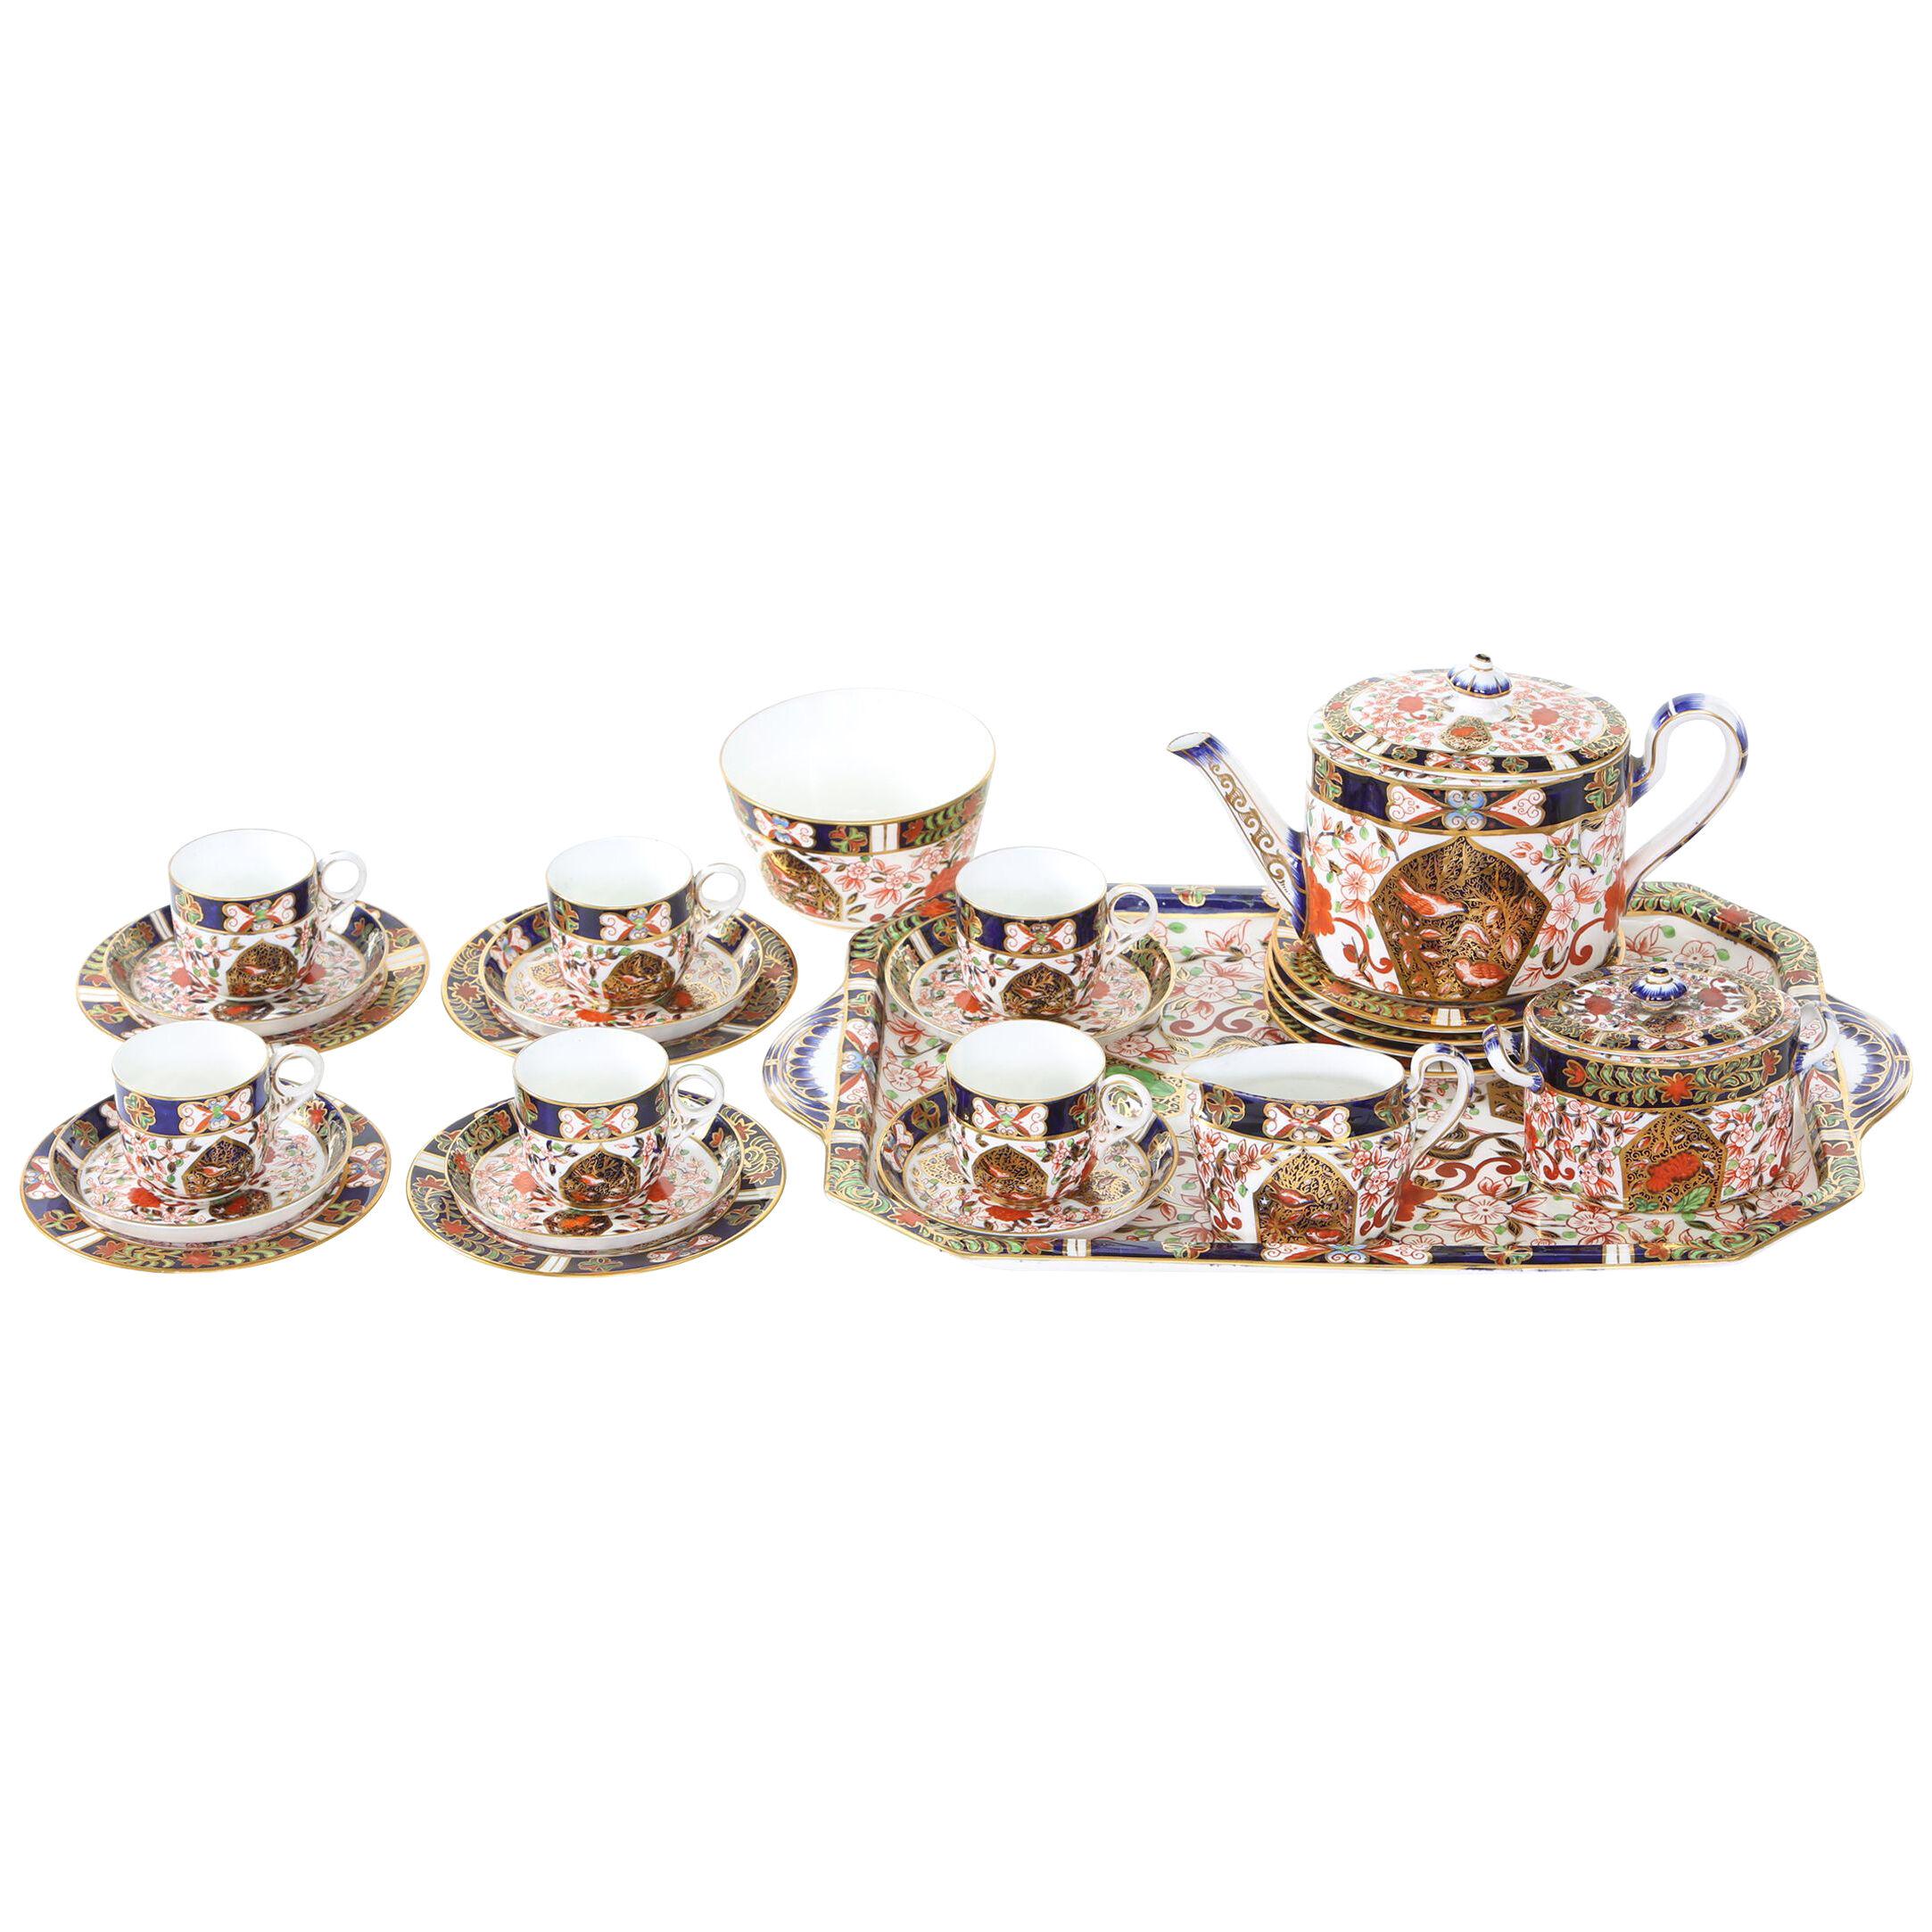 19th Century English Crown Derby Service For Ten People